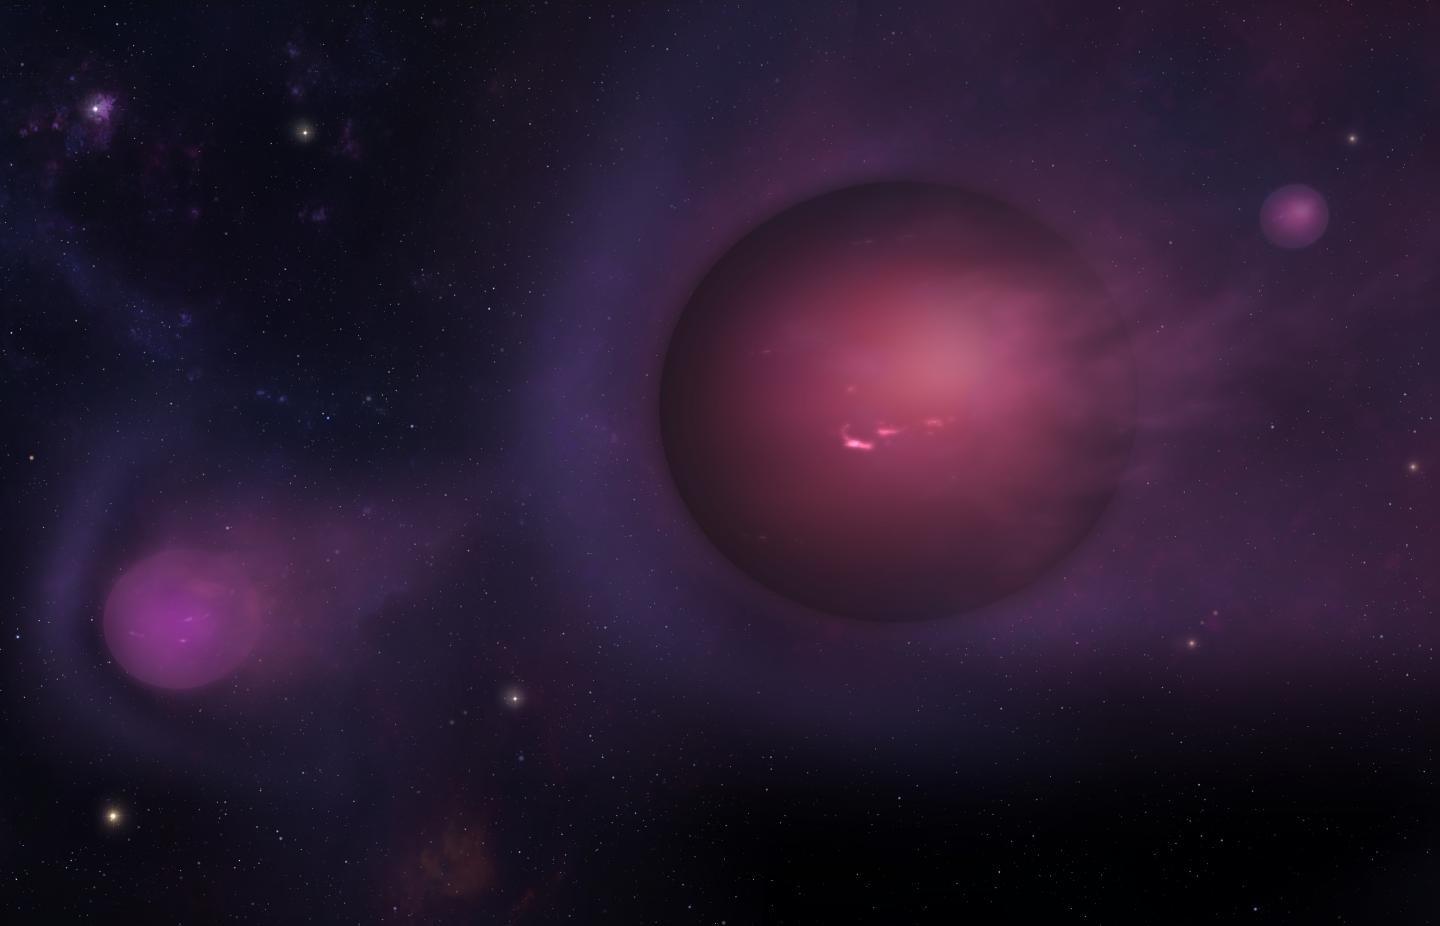 Artist's Conception of Planet-Mass Objects